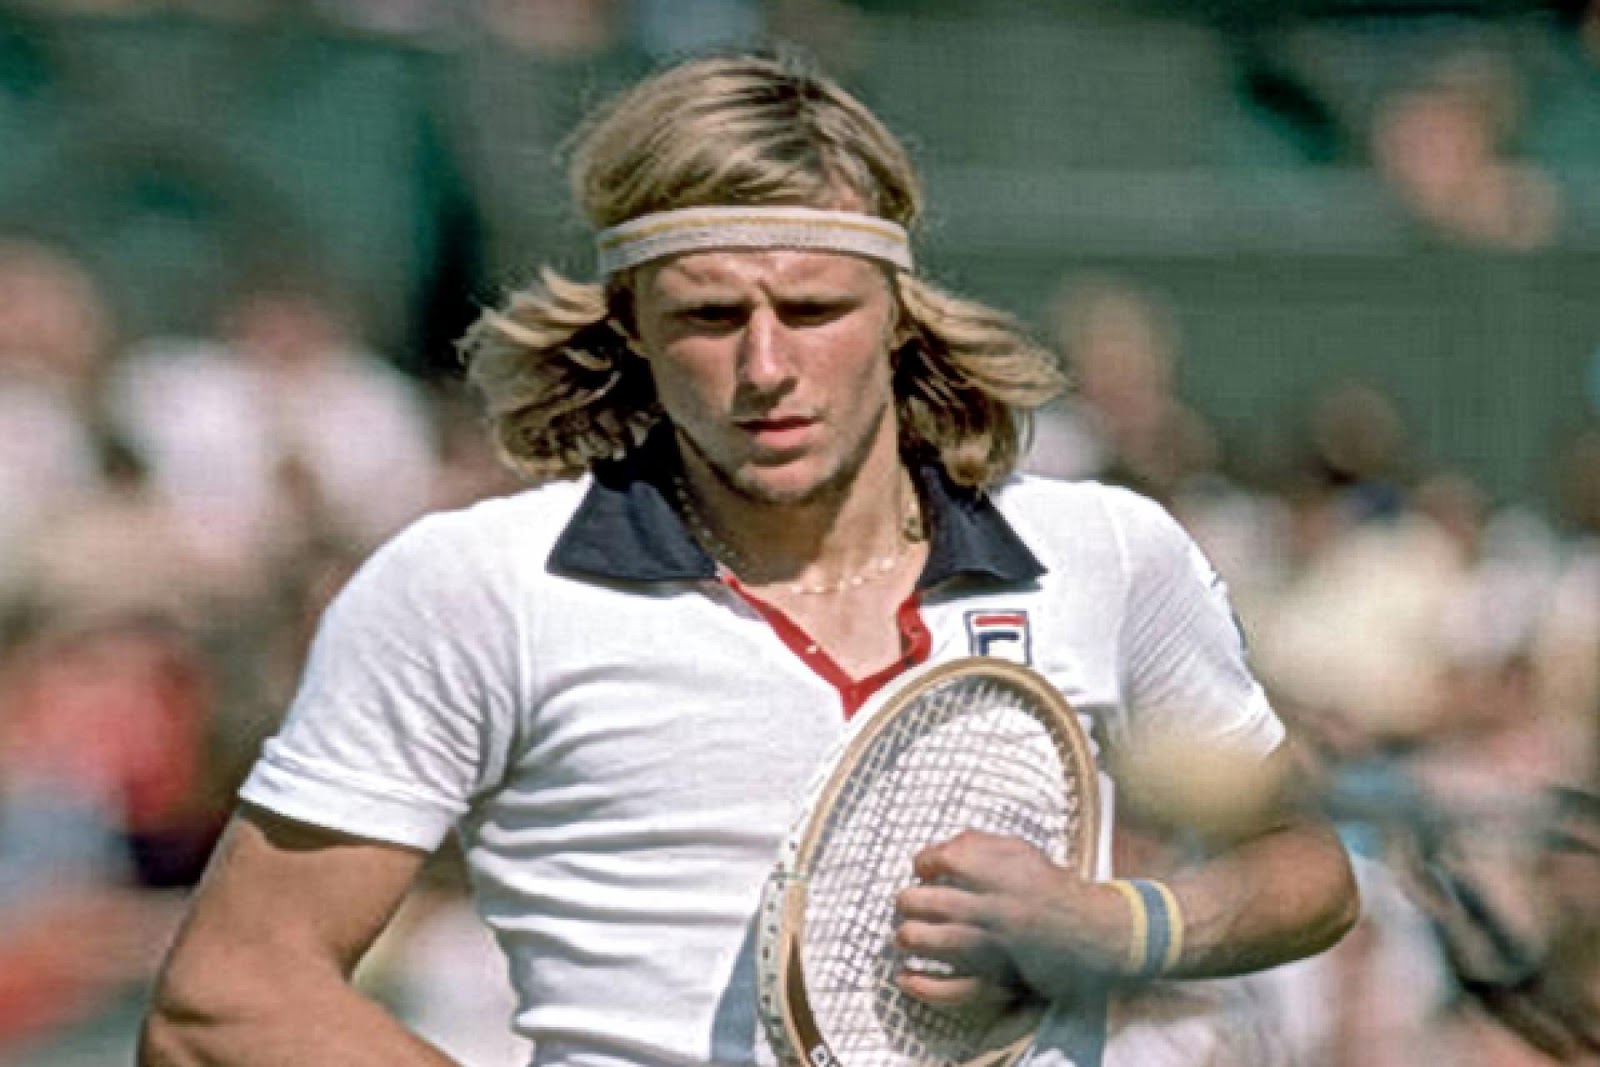 On this day: Bjorn Borg tops Rod Laver in their only Major encounter